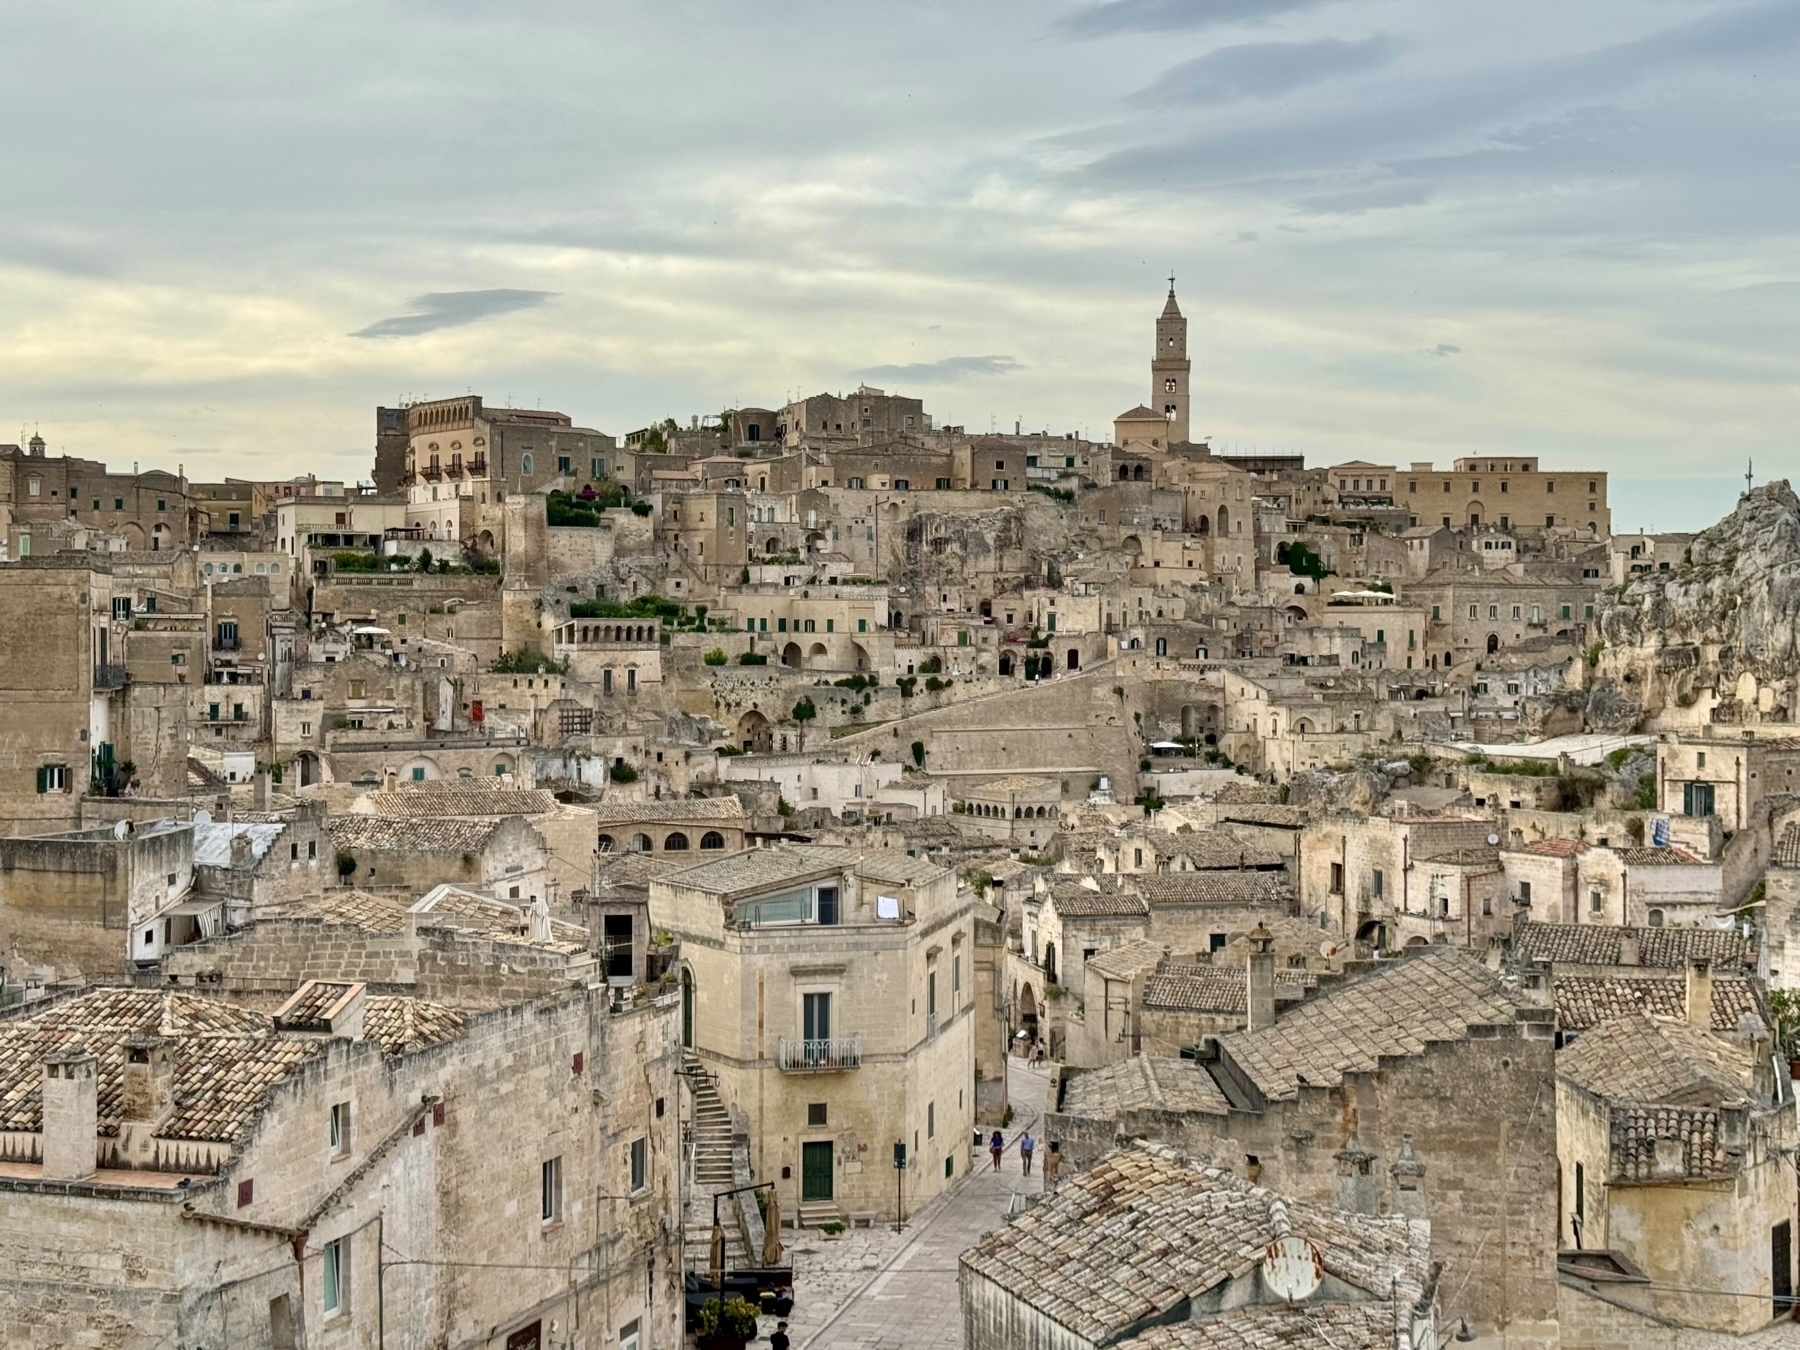 View of the ancient city of Matera in Italy, featuring a dense cluster of historic stone buildings with tiled roofs and narrow streets. The landscape is dominated by a church tower rising above the city. The sky is overcast with scattered clouds.